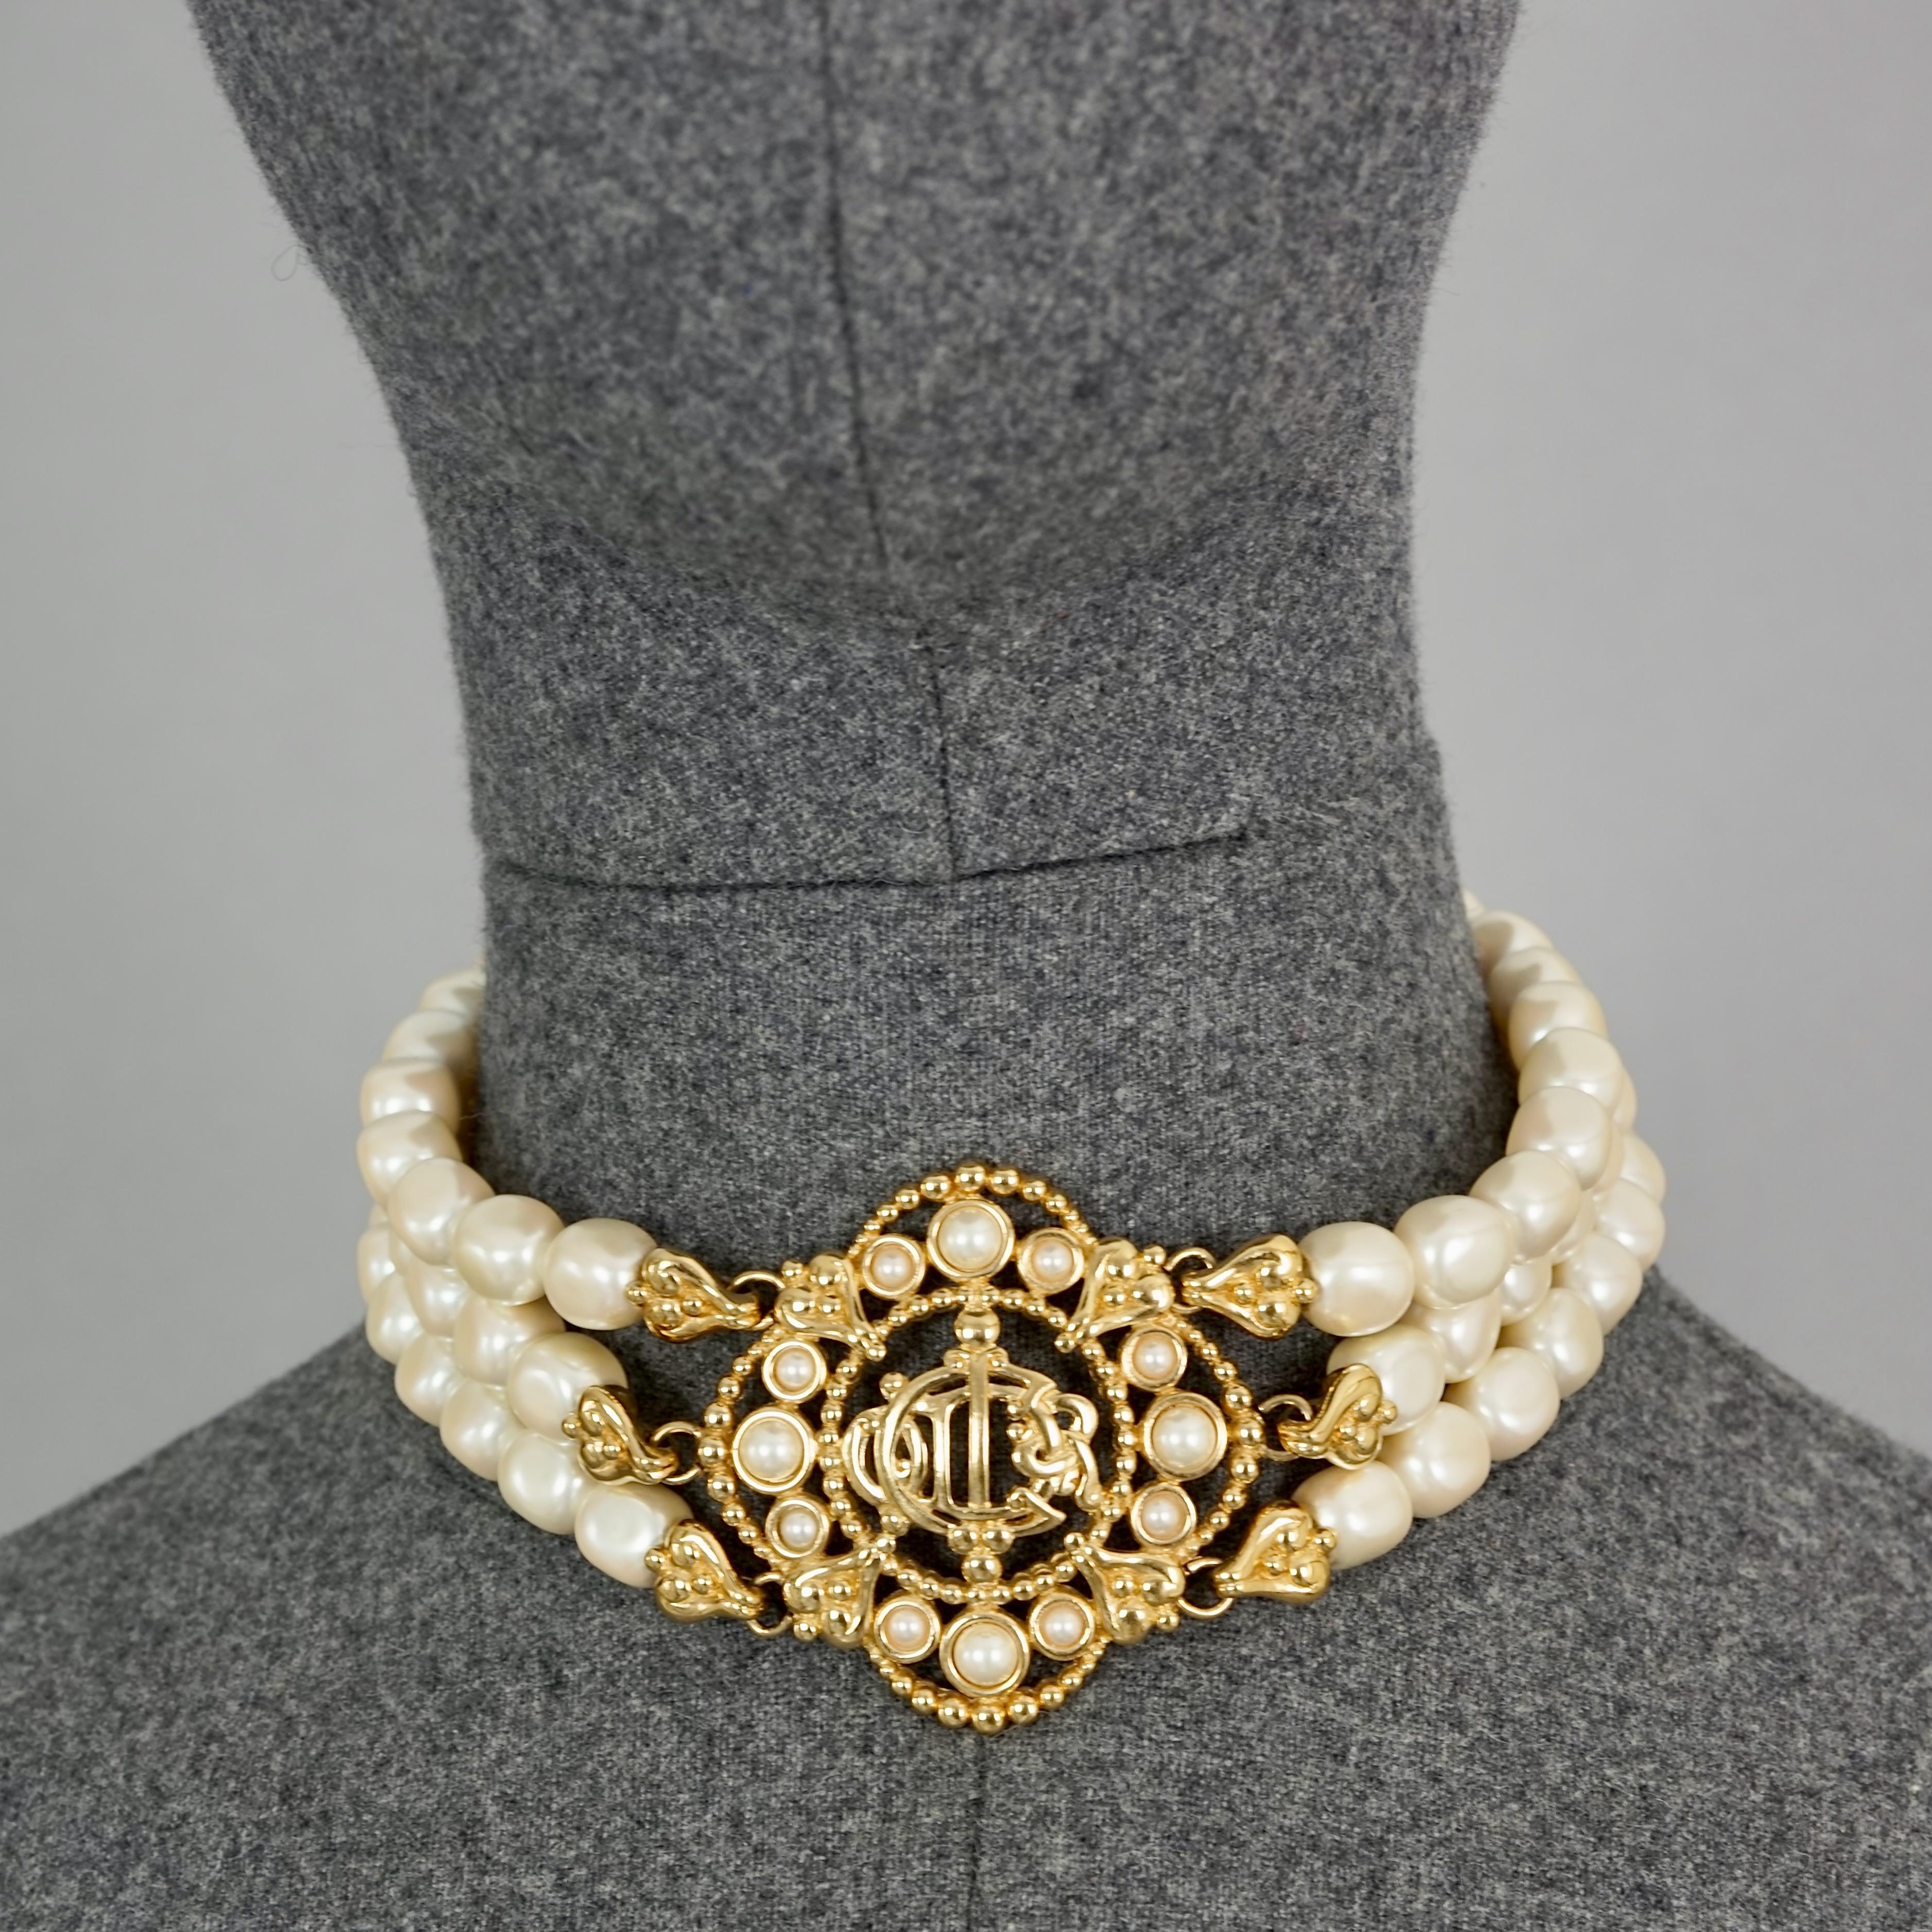 Vintage CHRISTIAN DIOR Logo Insignia Medallion Tiered Pearl Choker Necklace

MEASUREMENTS:
Height: 2.16 inches (5.5 cm)
Wearable Length: 13.38 inches to 15.15 inches (34 cm to 38.5 cm)

FEATURES:
- 100% Authentic CHRISTIAN DIOR.
- 3 Tiered glass